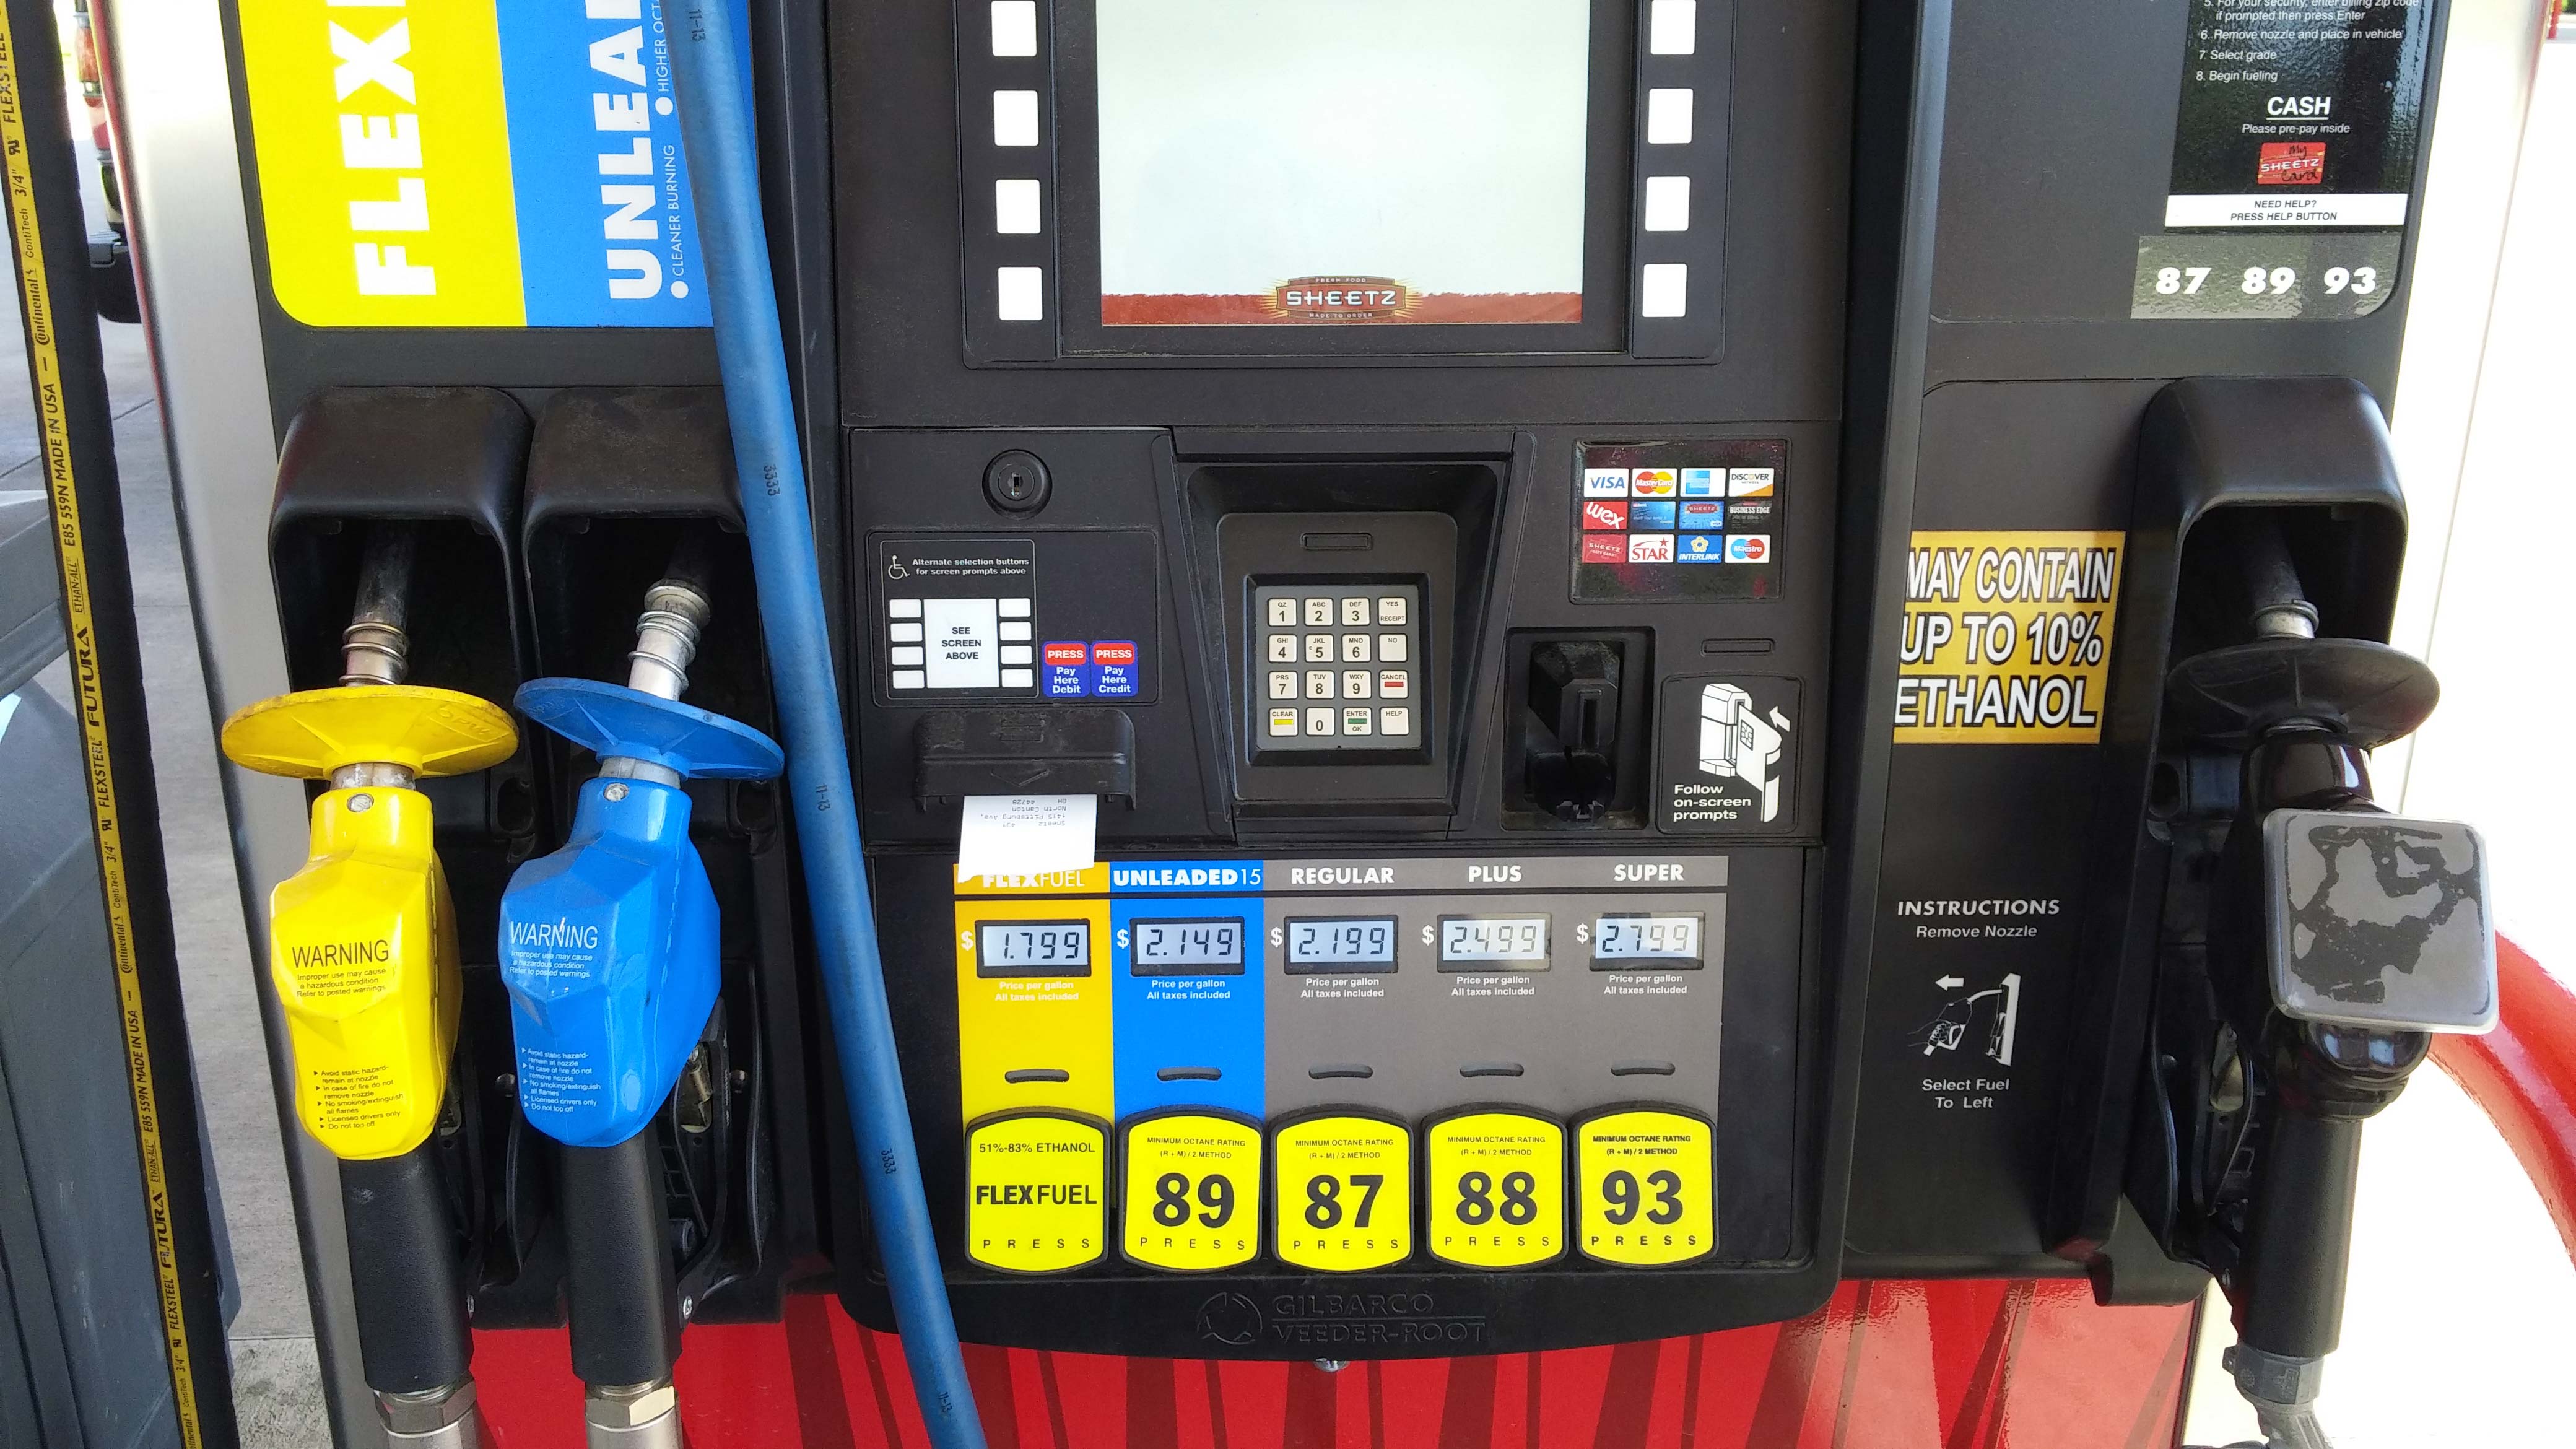 Just how easy is it to misfuel your boat? This gas pump in Ohio has no required E15 warning label and simply selecting the 89-octane grade fuel would be illegal, likely void your boat motors warranty, and may lead to engine damage (credit: D.A. Saus).